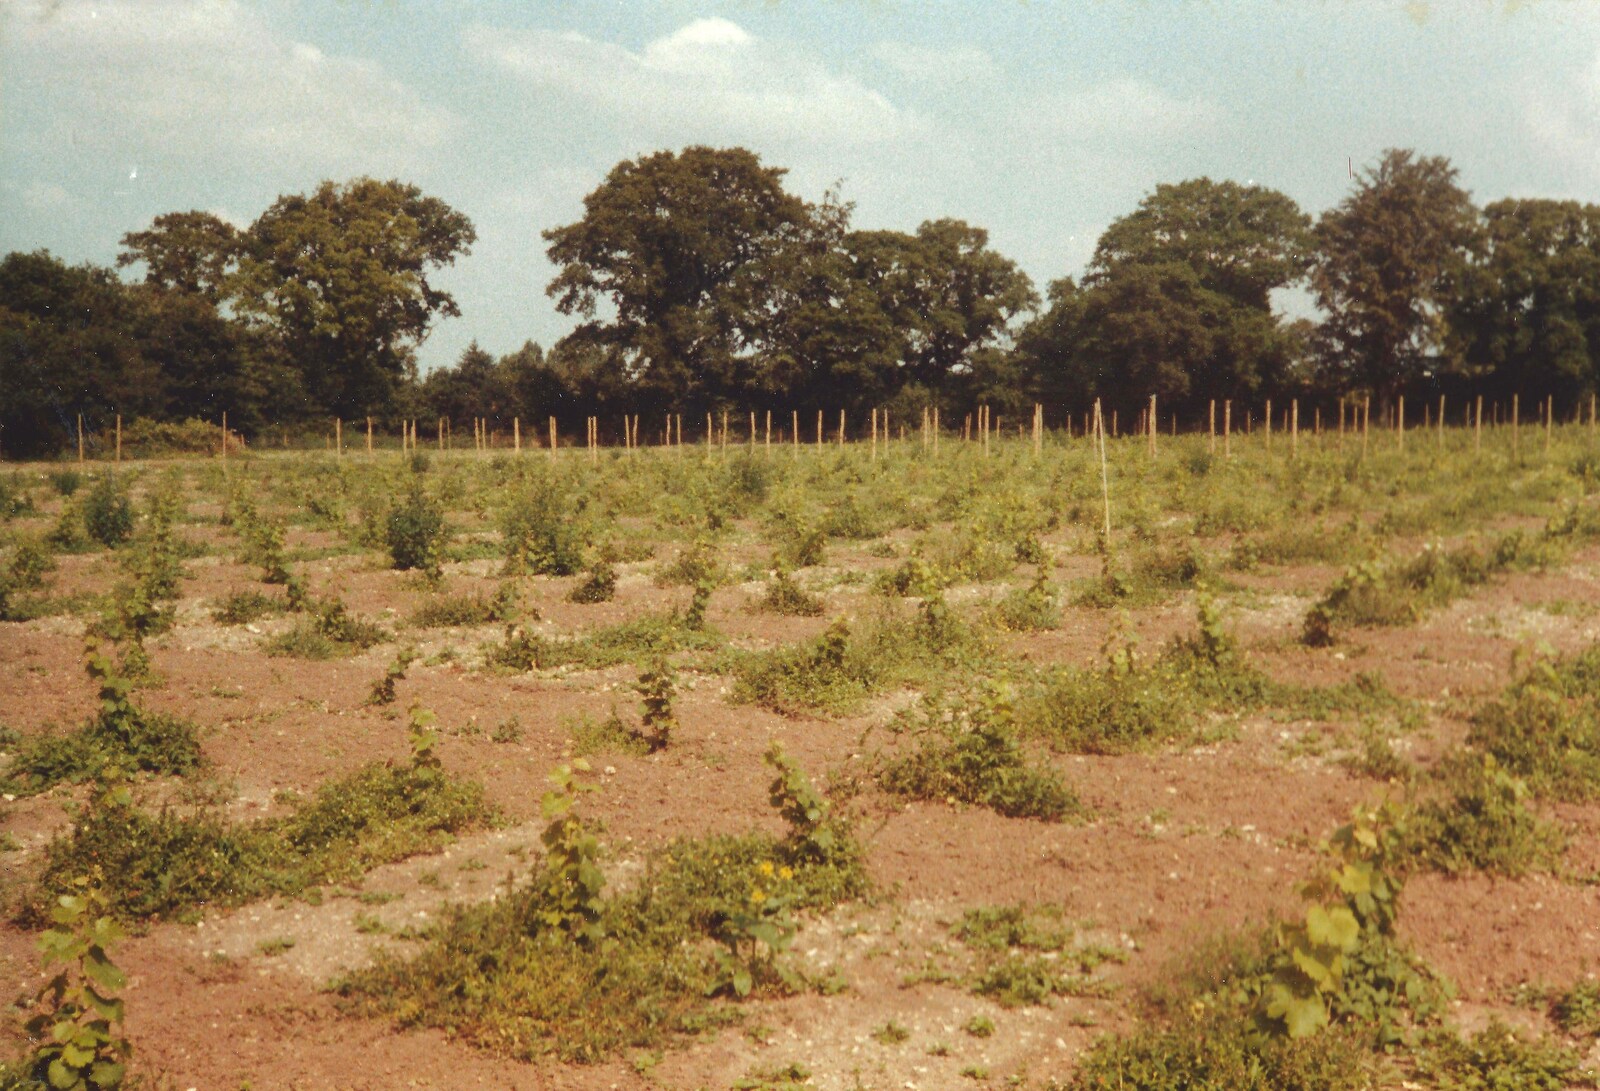 The vines compete with the weeds from Constructing a Vineyard, Harrow Road, Bransgore, Dorset - 1st September 1981